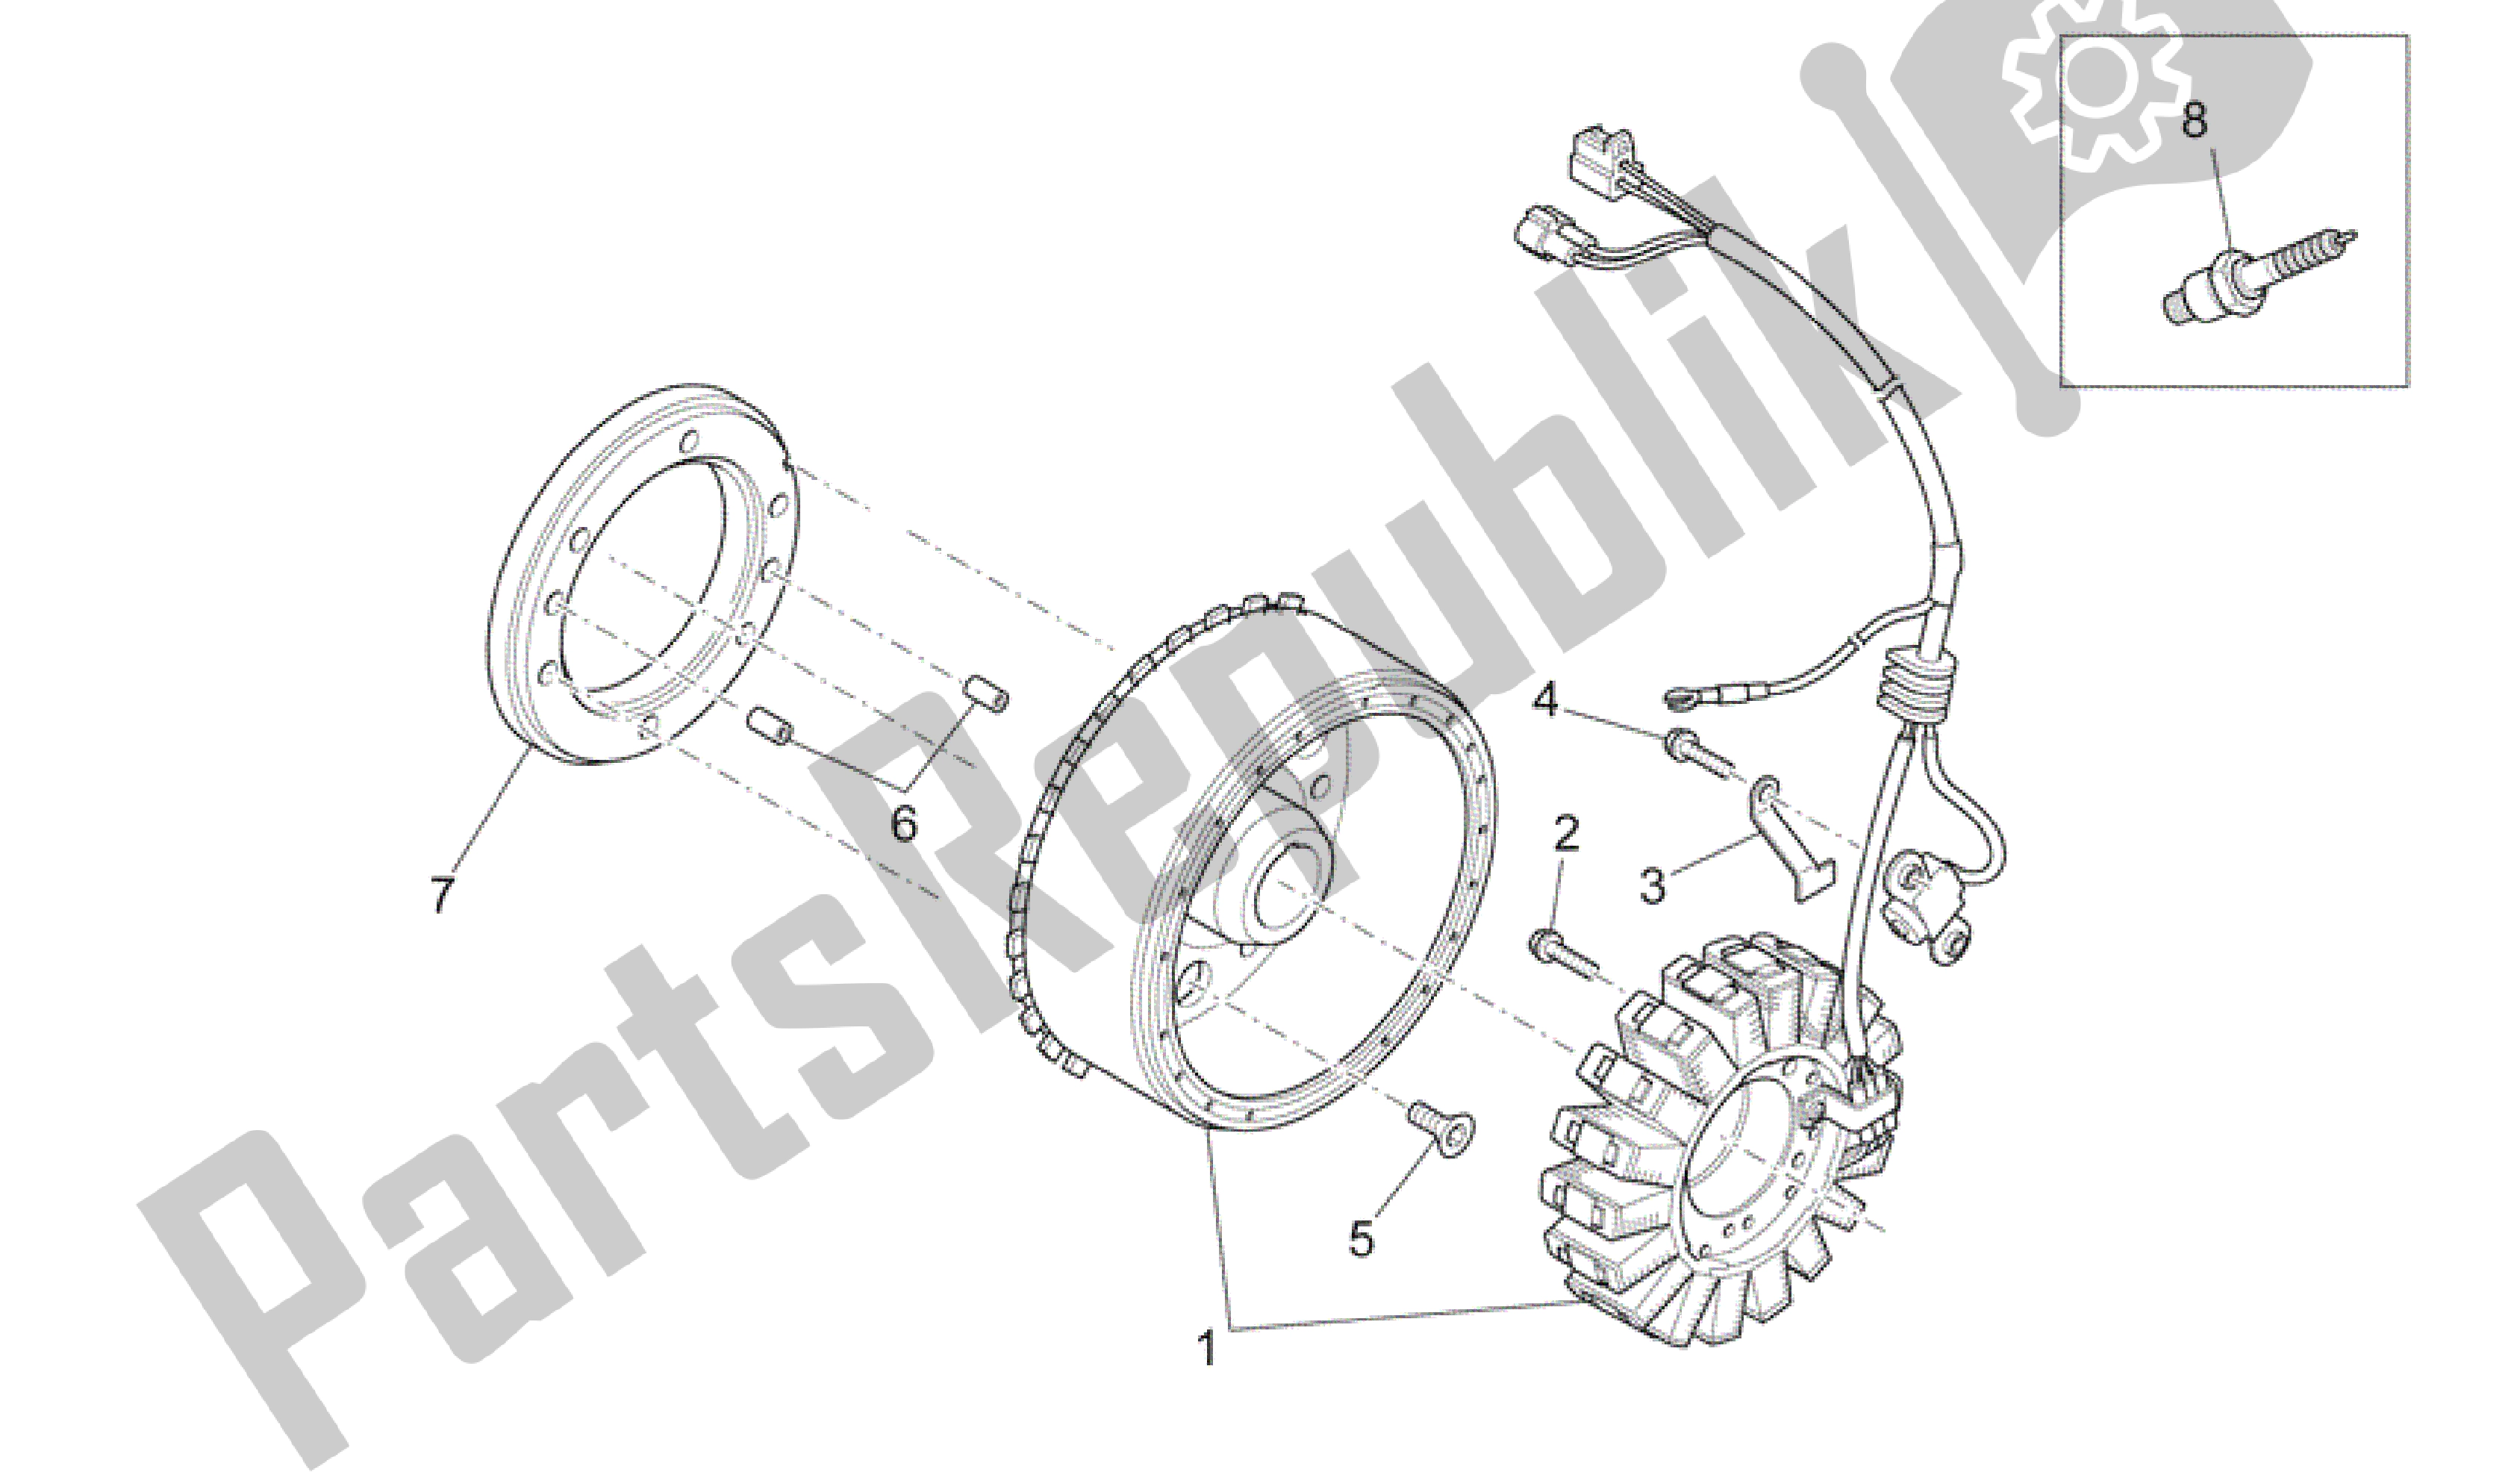 All parts for the Ignition Unit of the Aprilia RXV 450 2009 - 2011